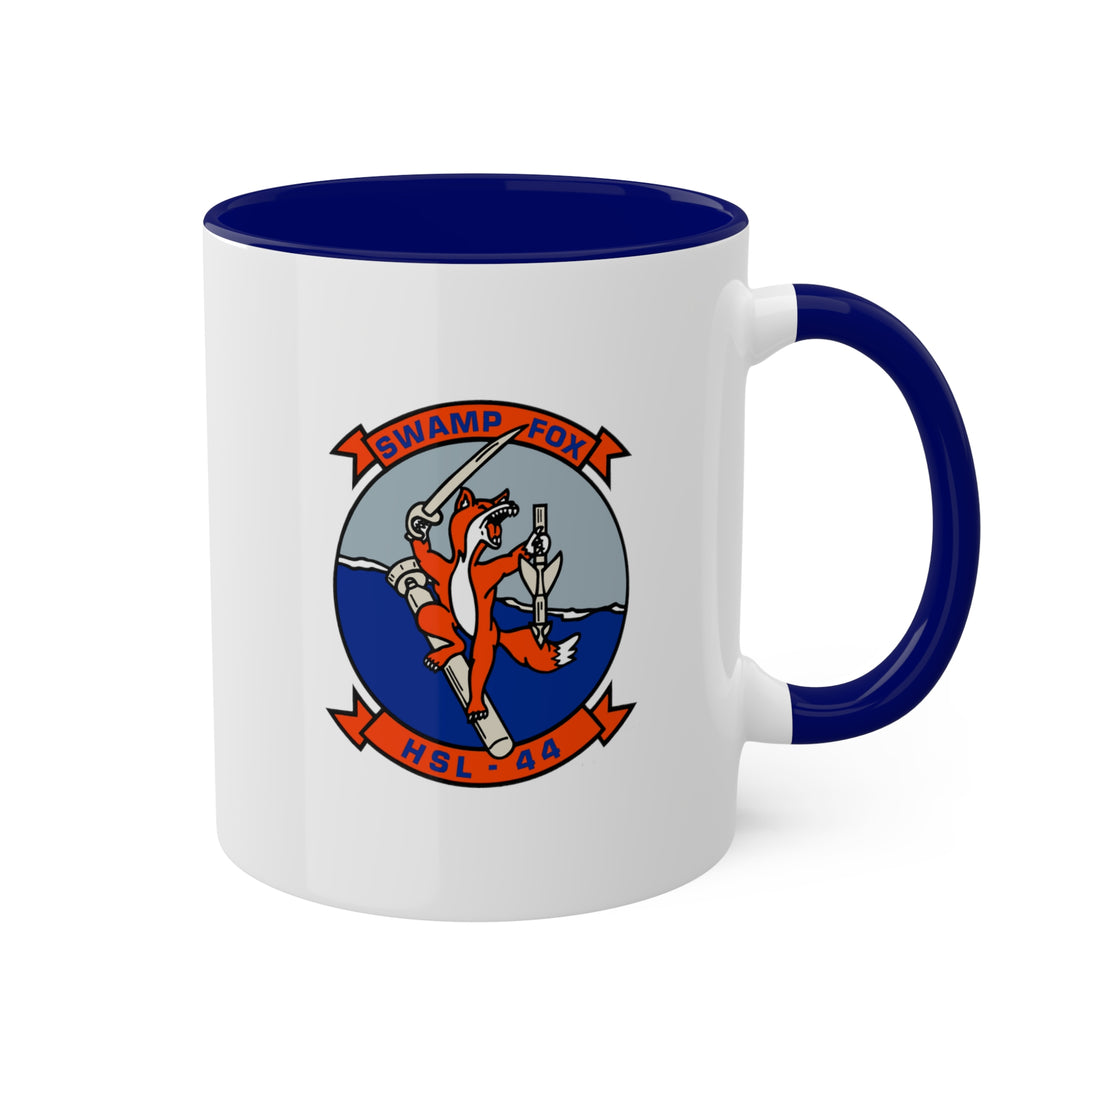 HSL-44 "Swamp Foxes" Naval Aviator 10oz. Mug, Navy Helicopter ASW Light Squadron flying the SH-60B